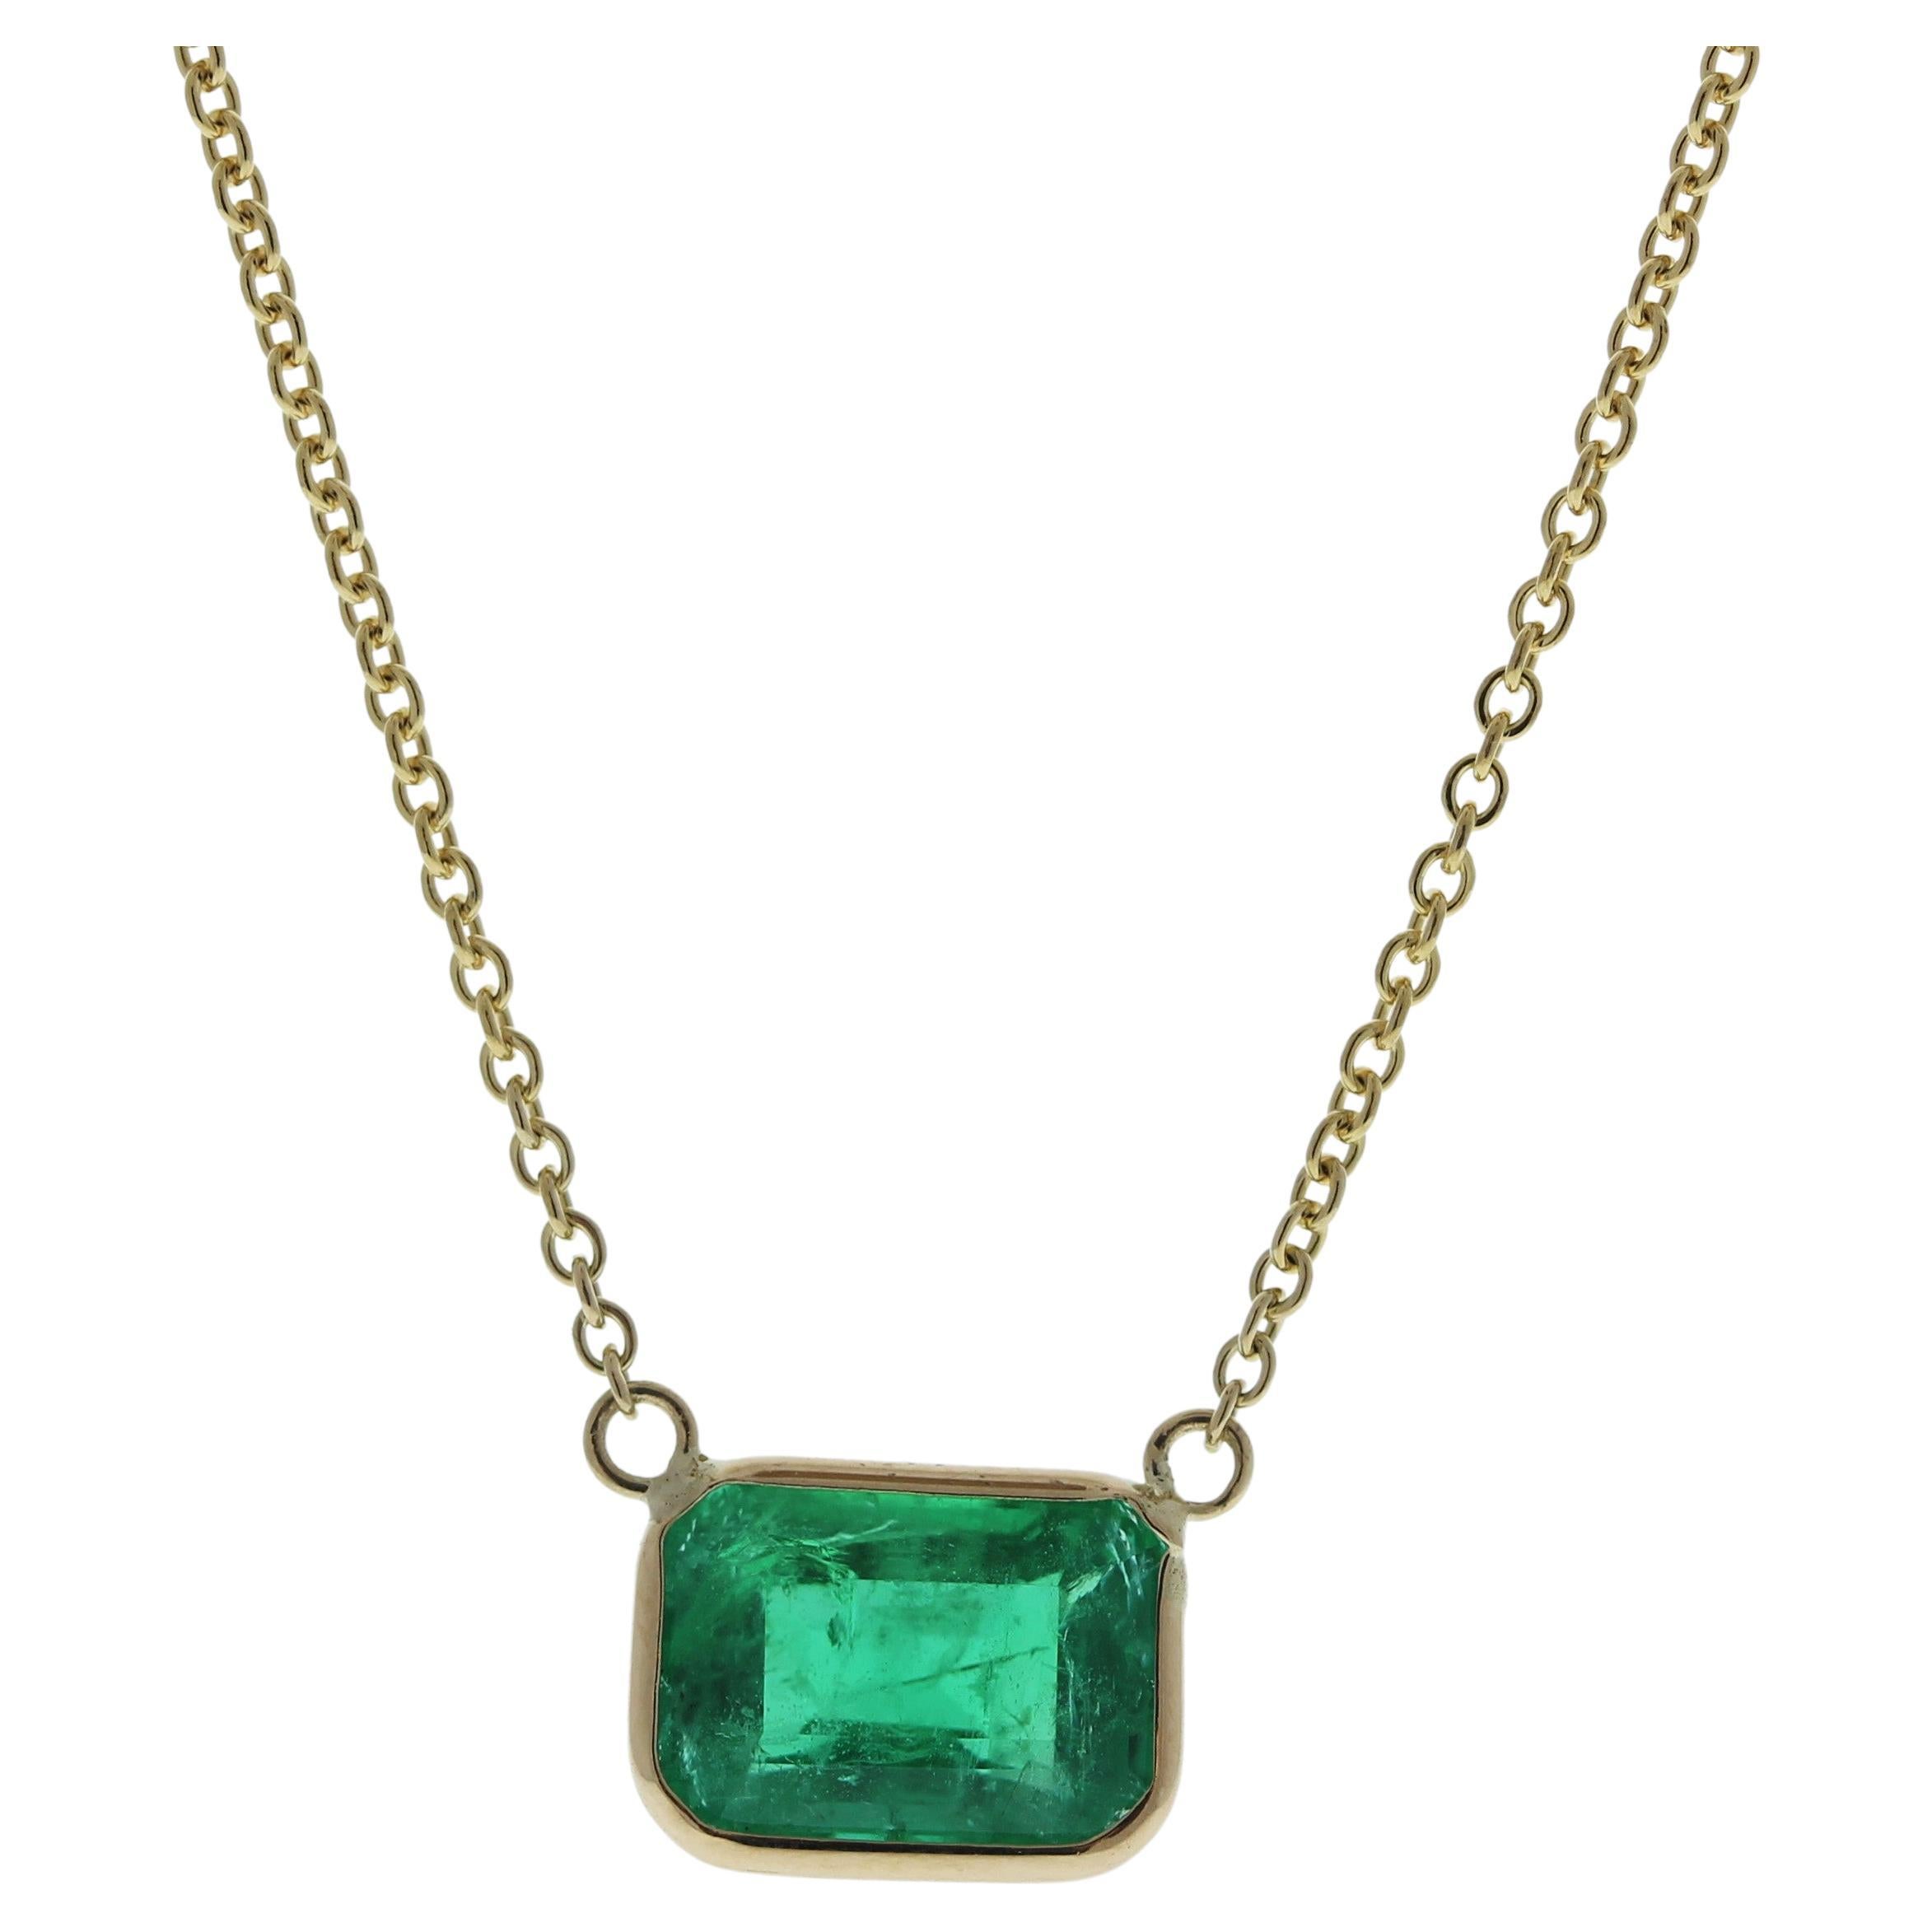 1.97 Carat Emerald Green Fashion Necklaces In 14k Yellow Gold